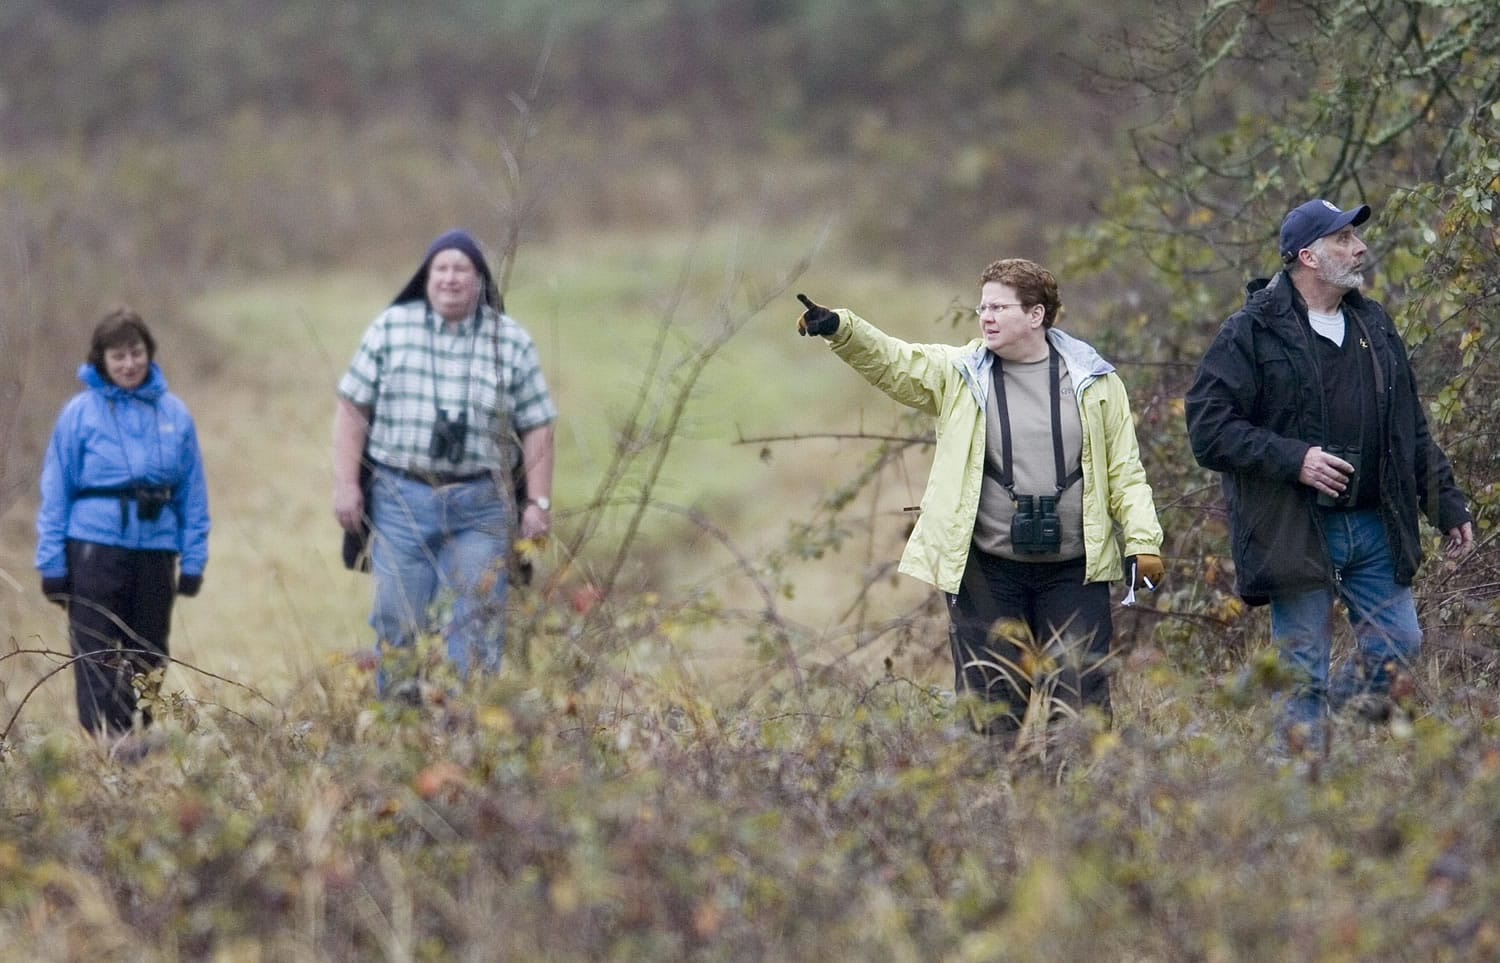 Birders look for feathered friends at the Ridgefield National Wildlife Refuge.